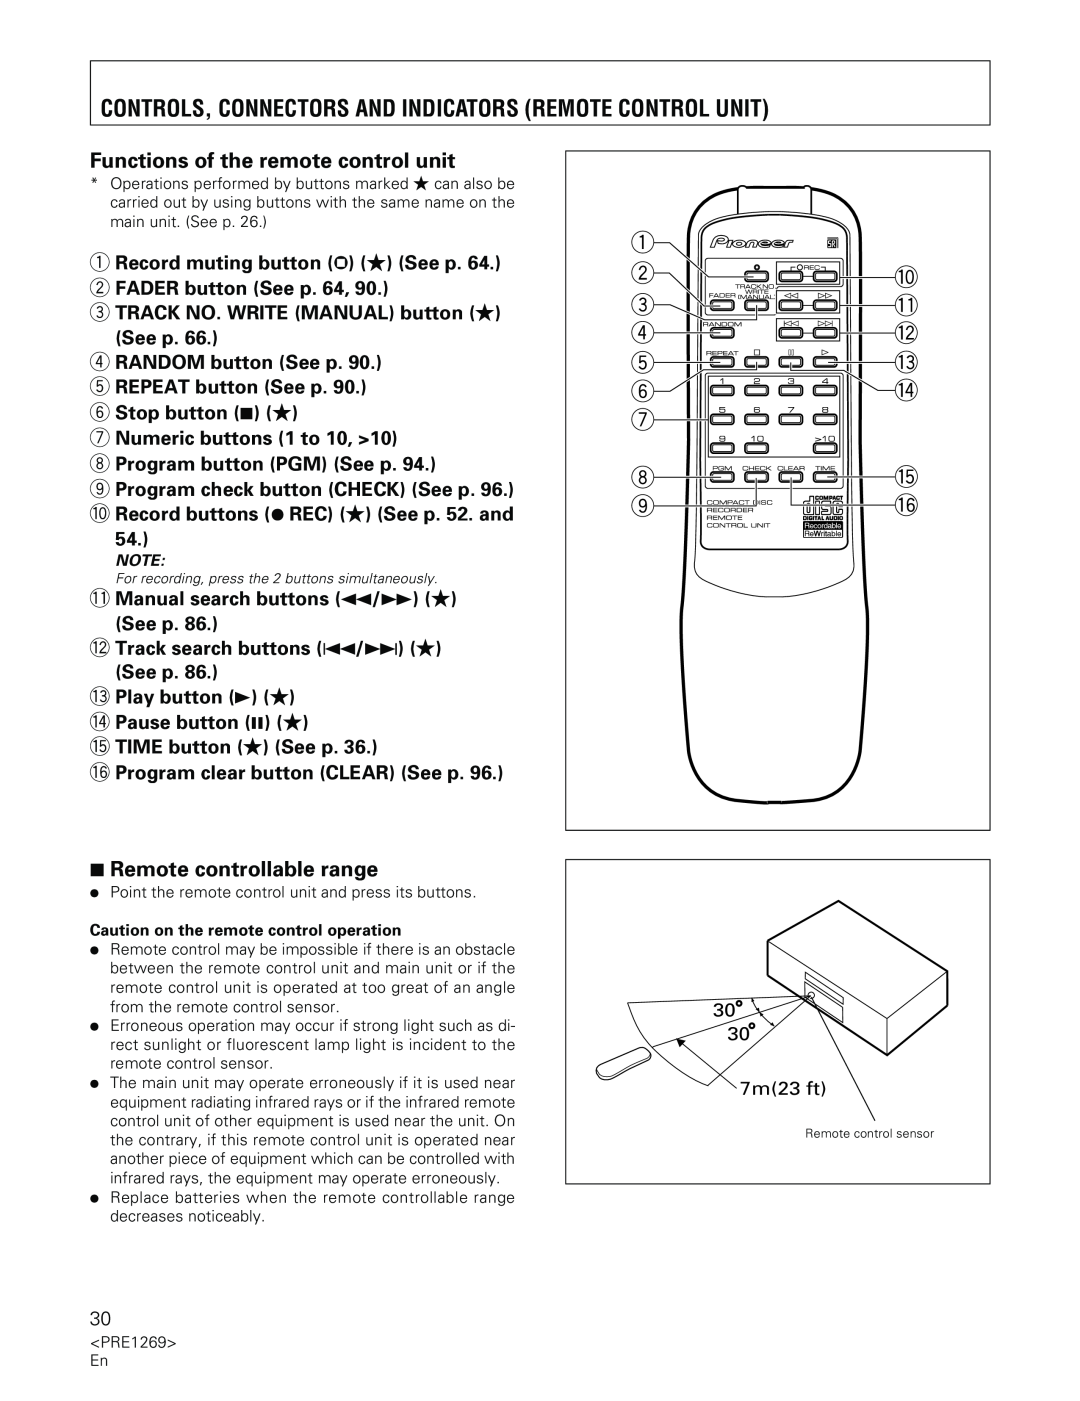 Pioneer PDR-555RW operating instructions Functions of the remote control unit, 7Remote controllable range 